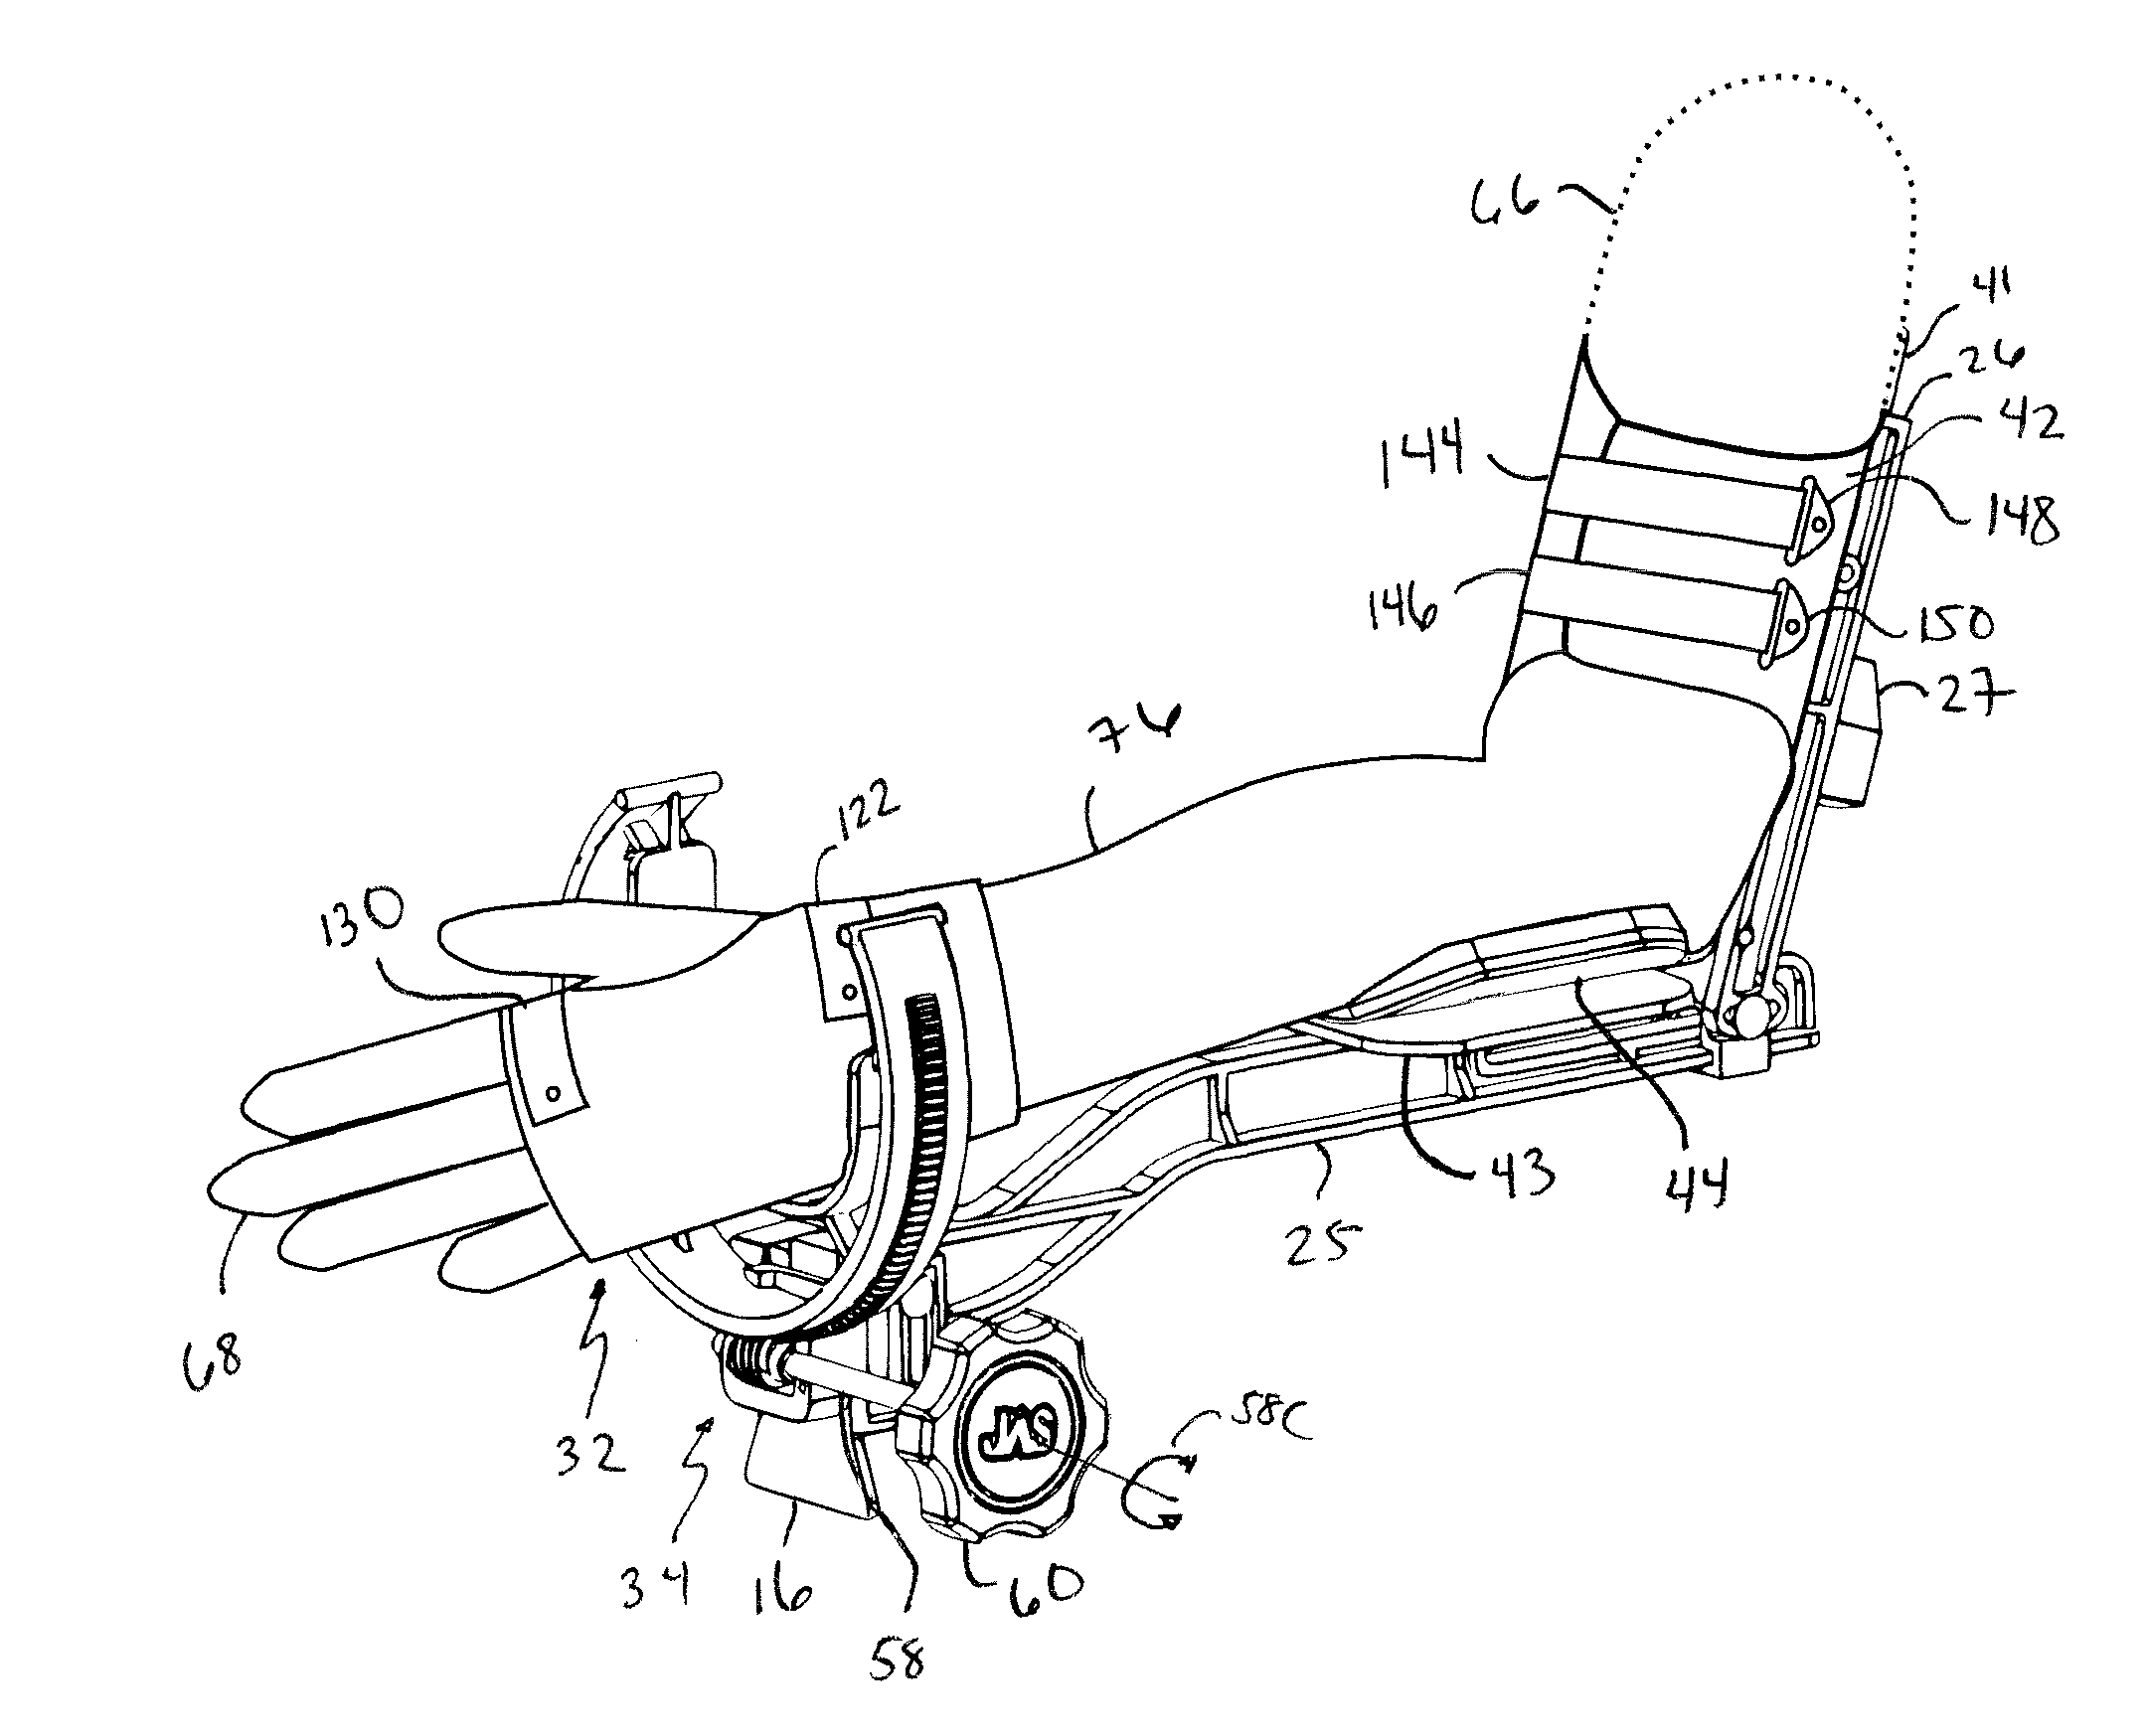 Orthosis apparatus and method of using an orthosis apparatus